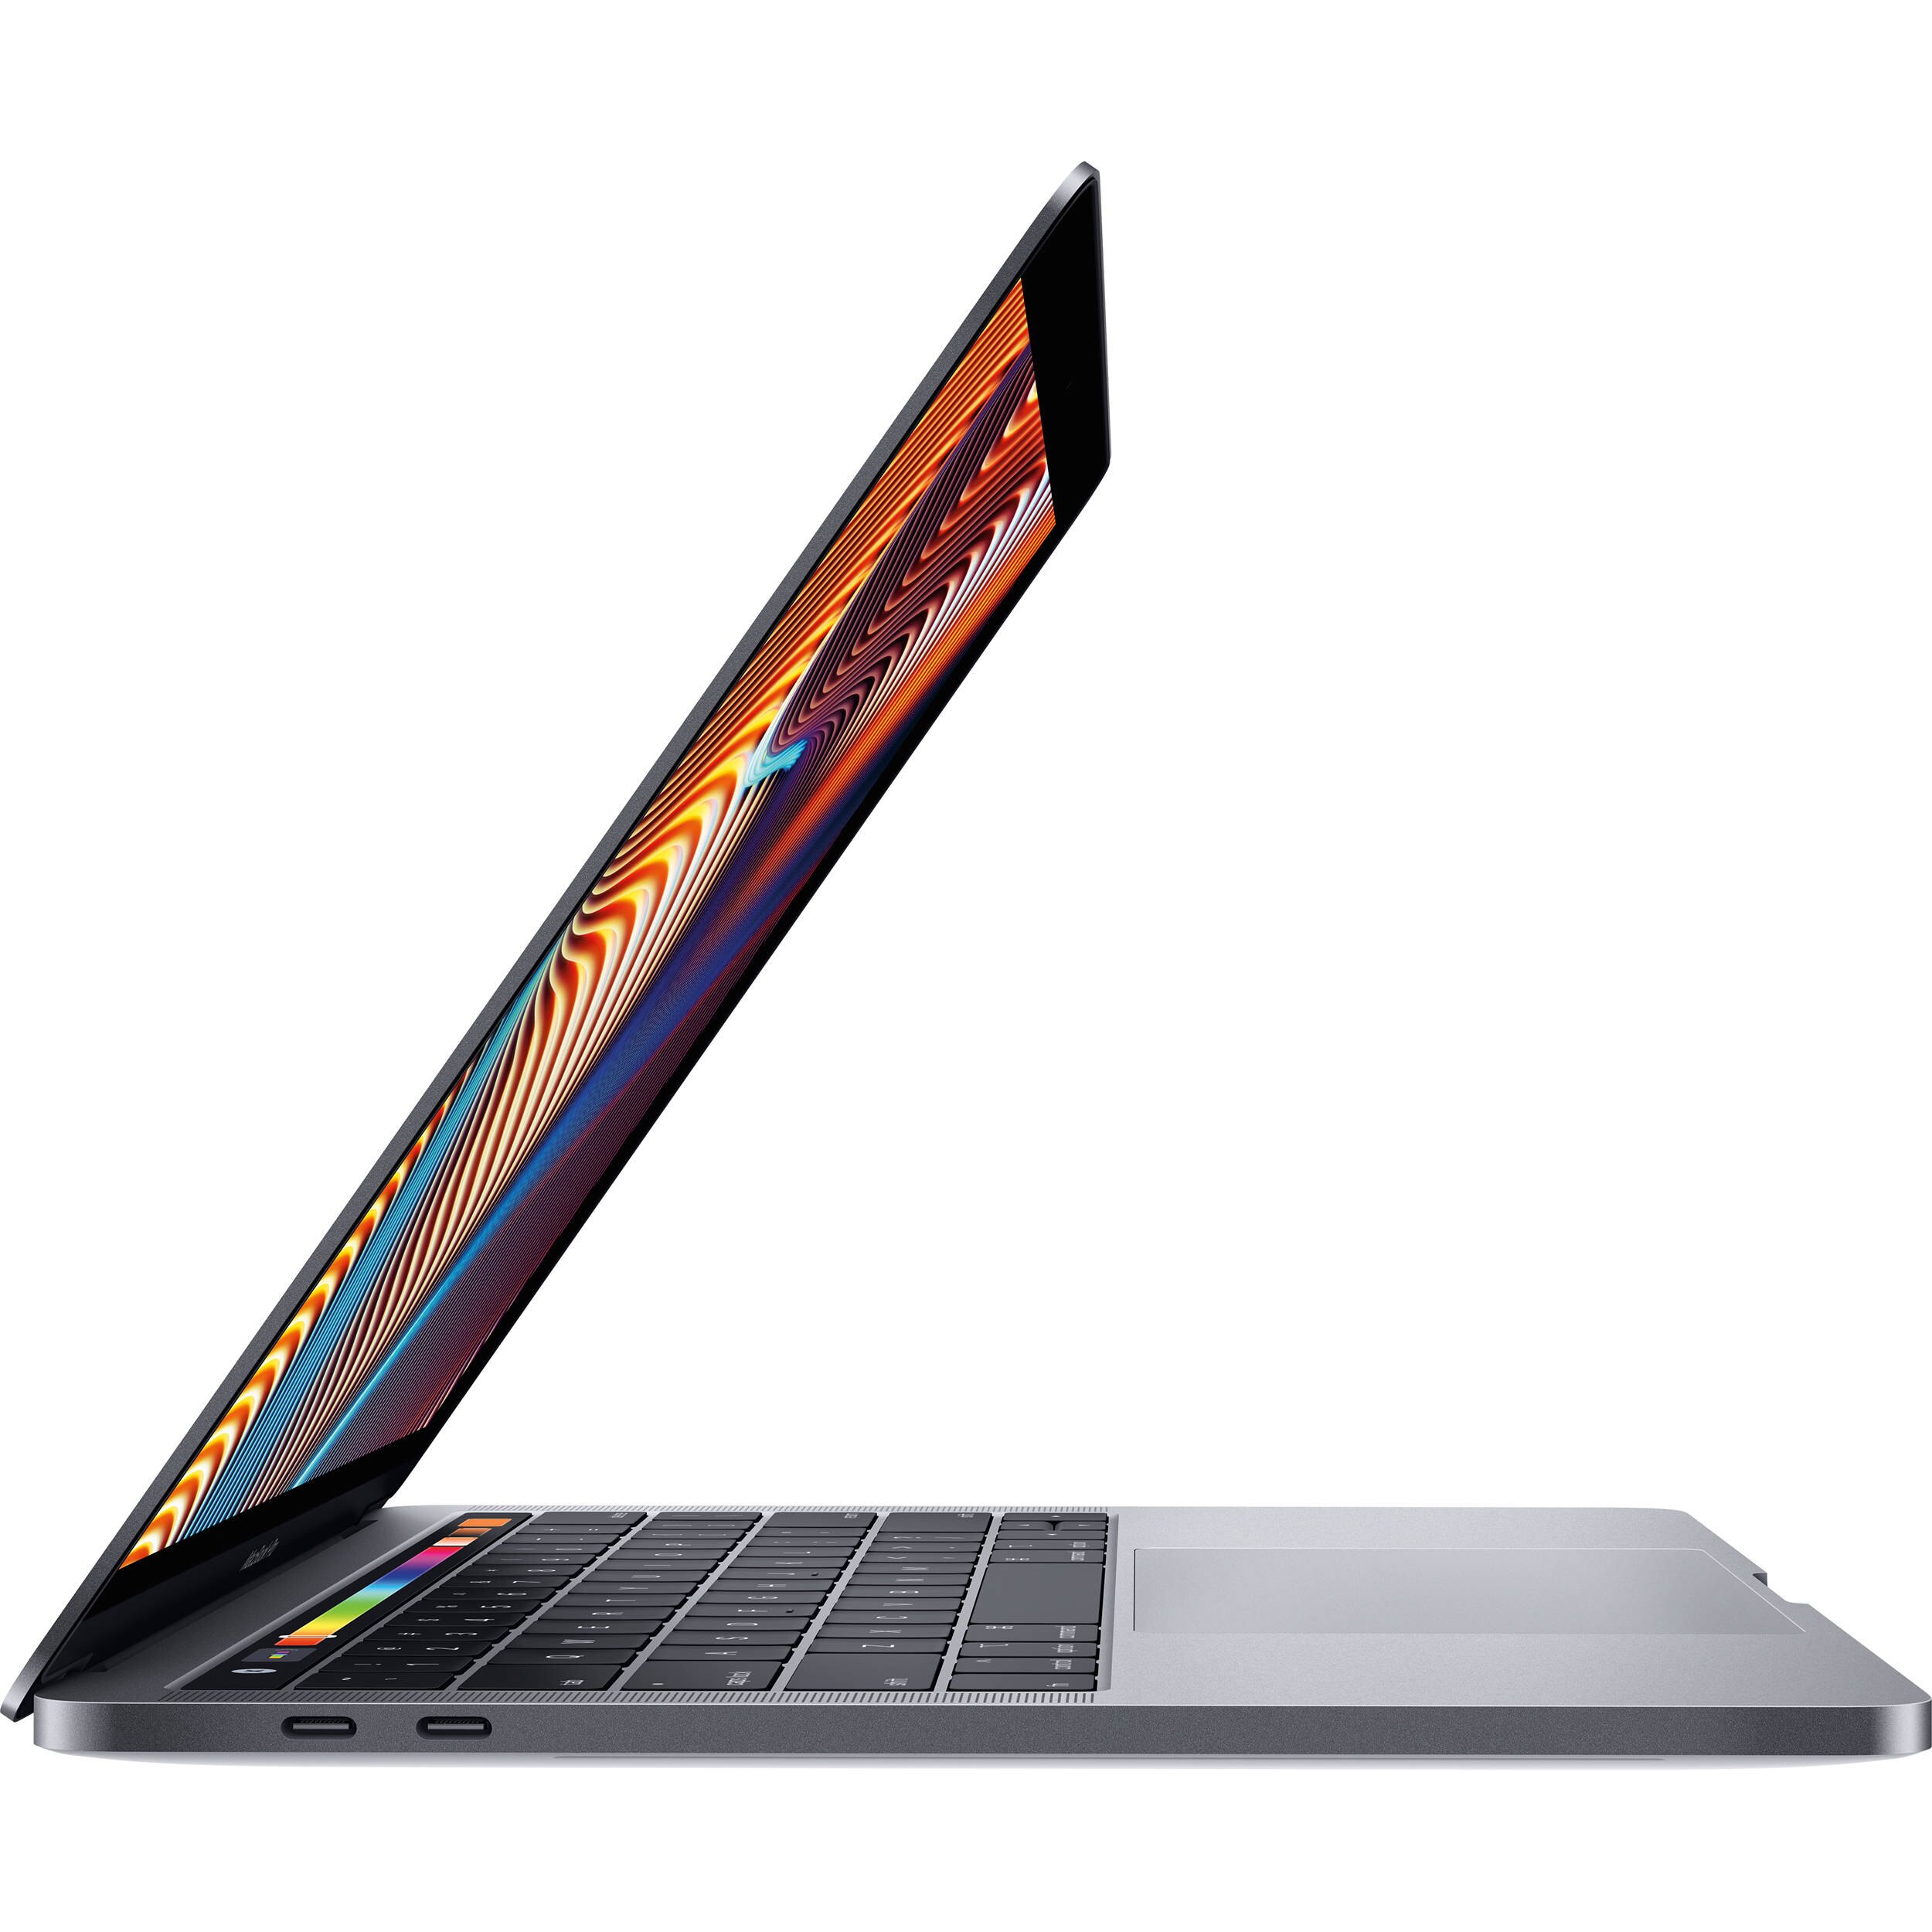 Apple MacBook Pro 13 inch with Touch Bar A1989 Mid 2018 Model